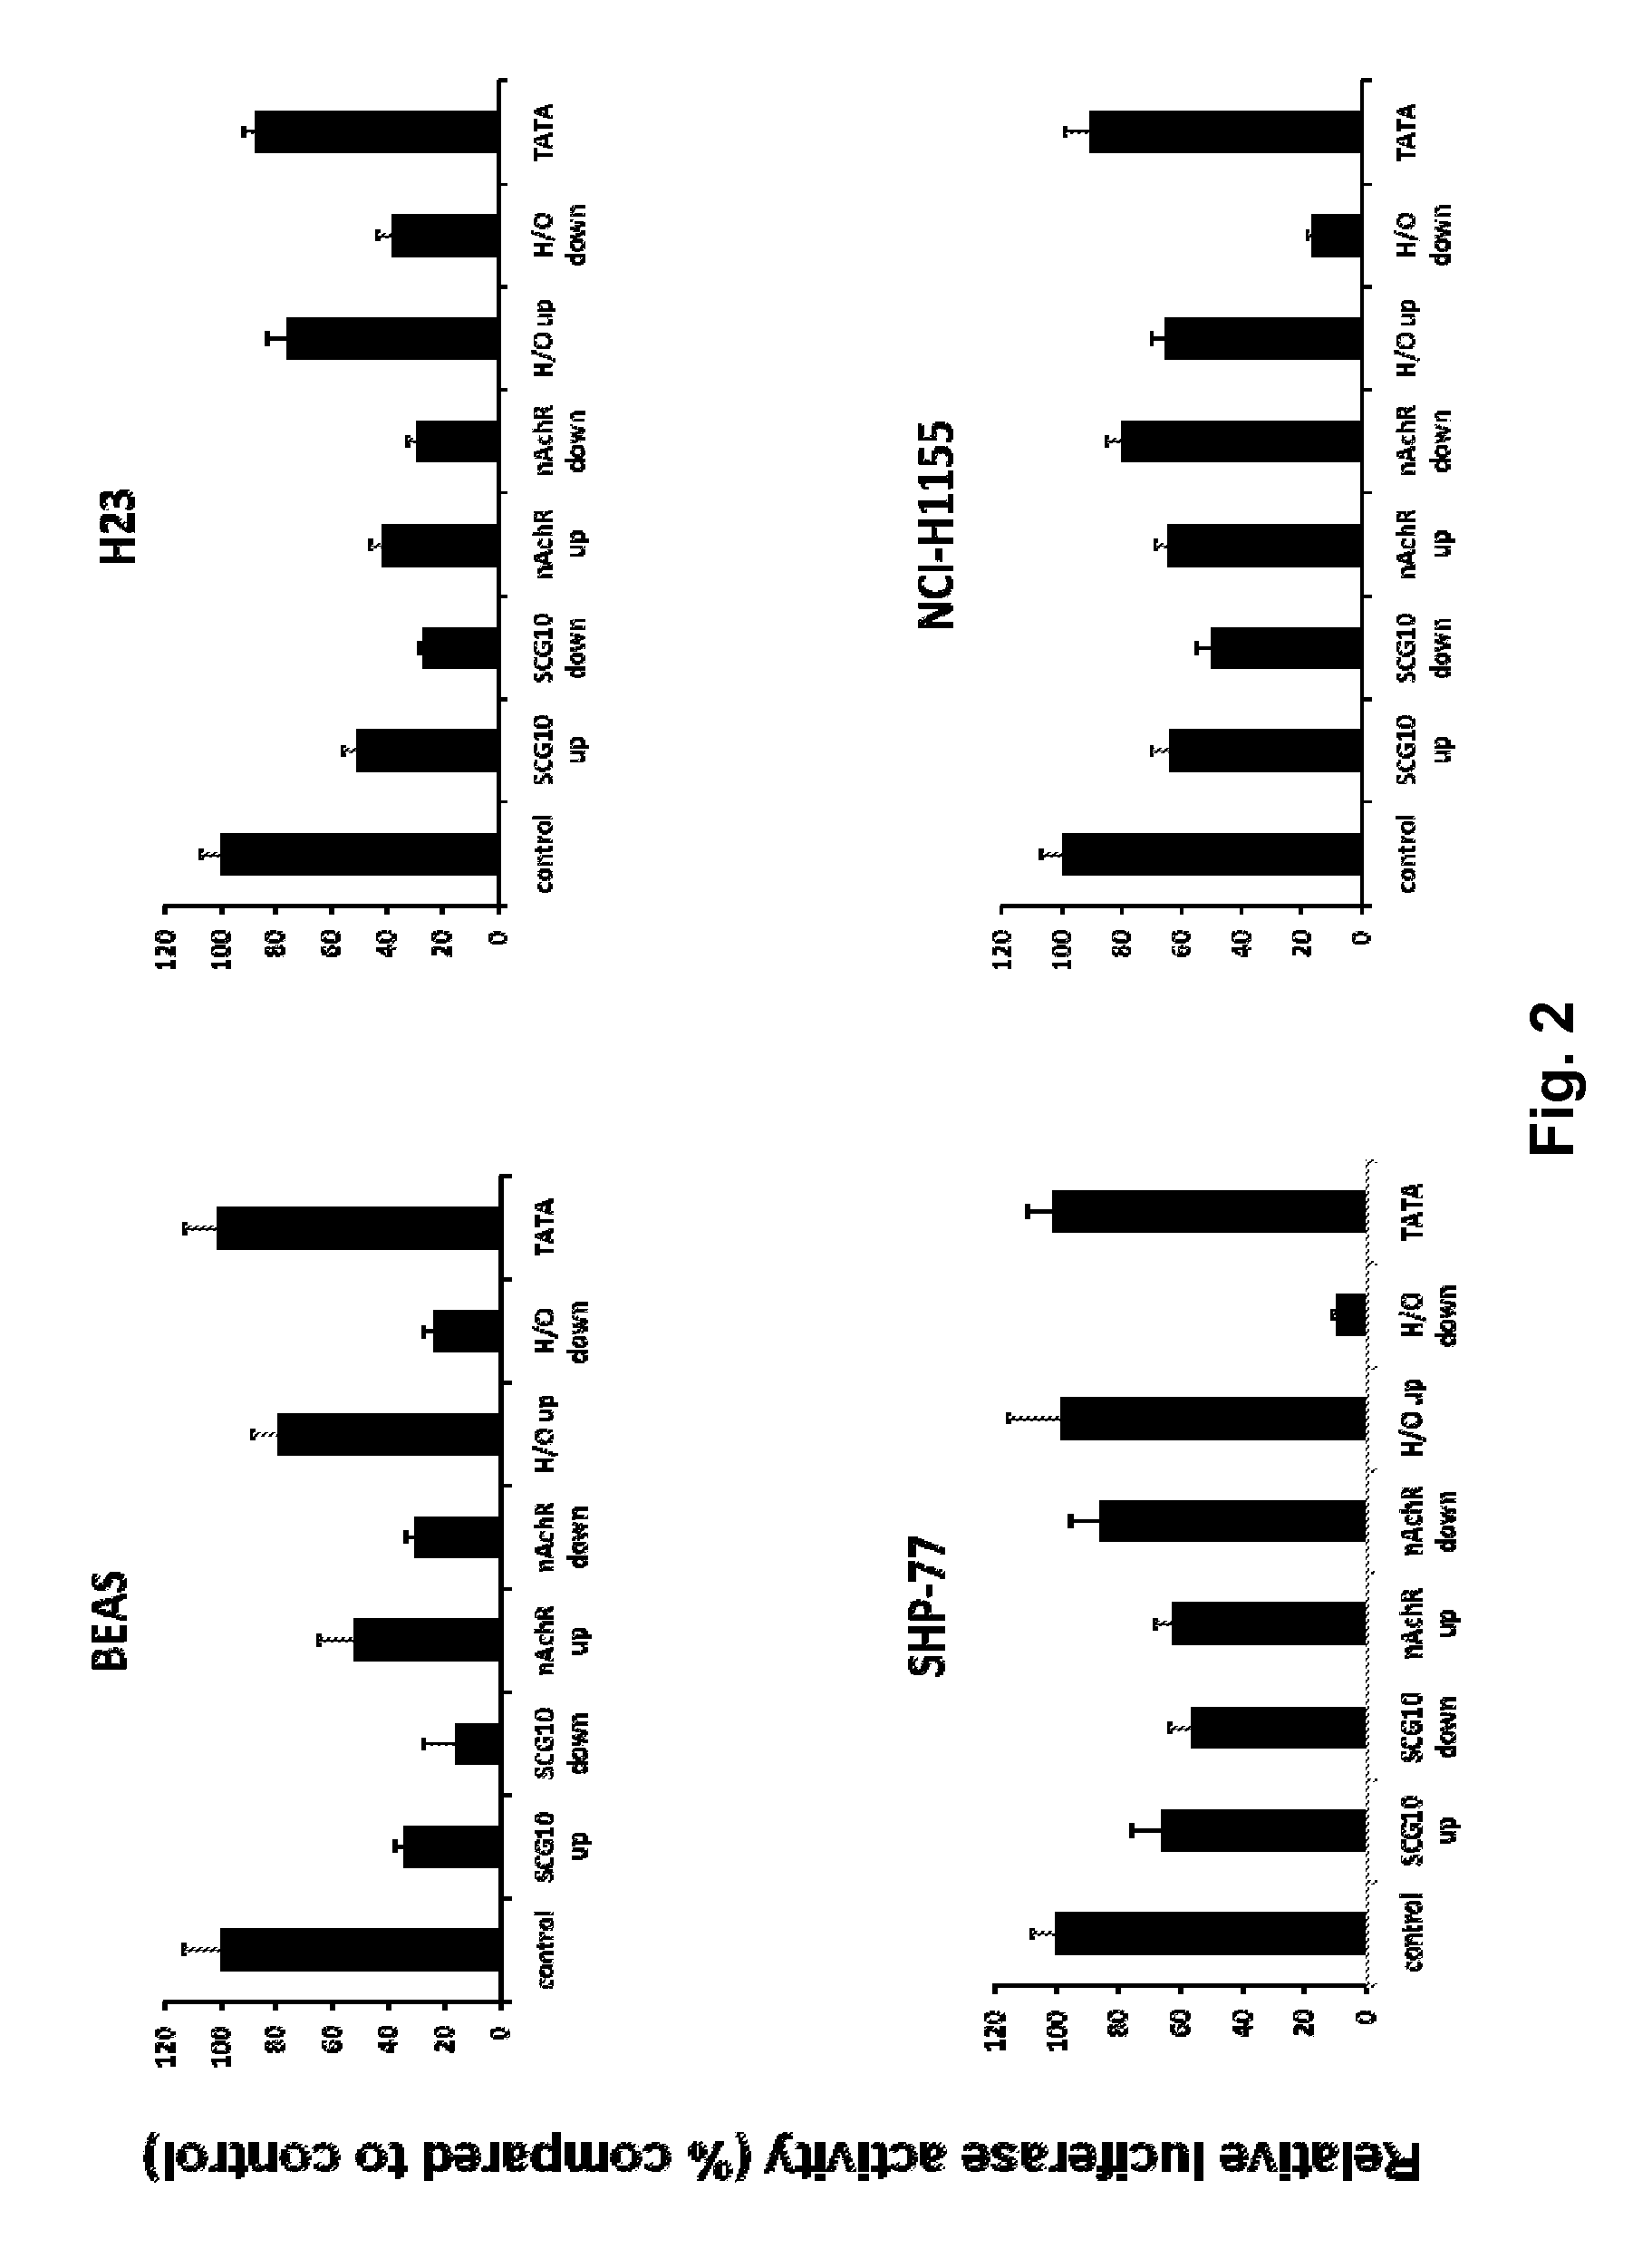 Modified INSM1-promoter for neuroendocrine tumor therapy and diagnostics